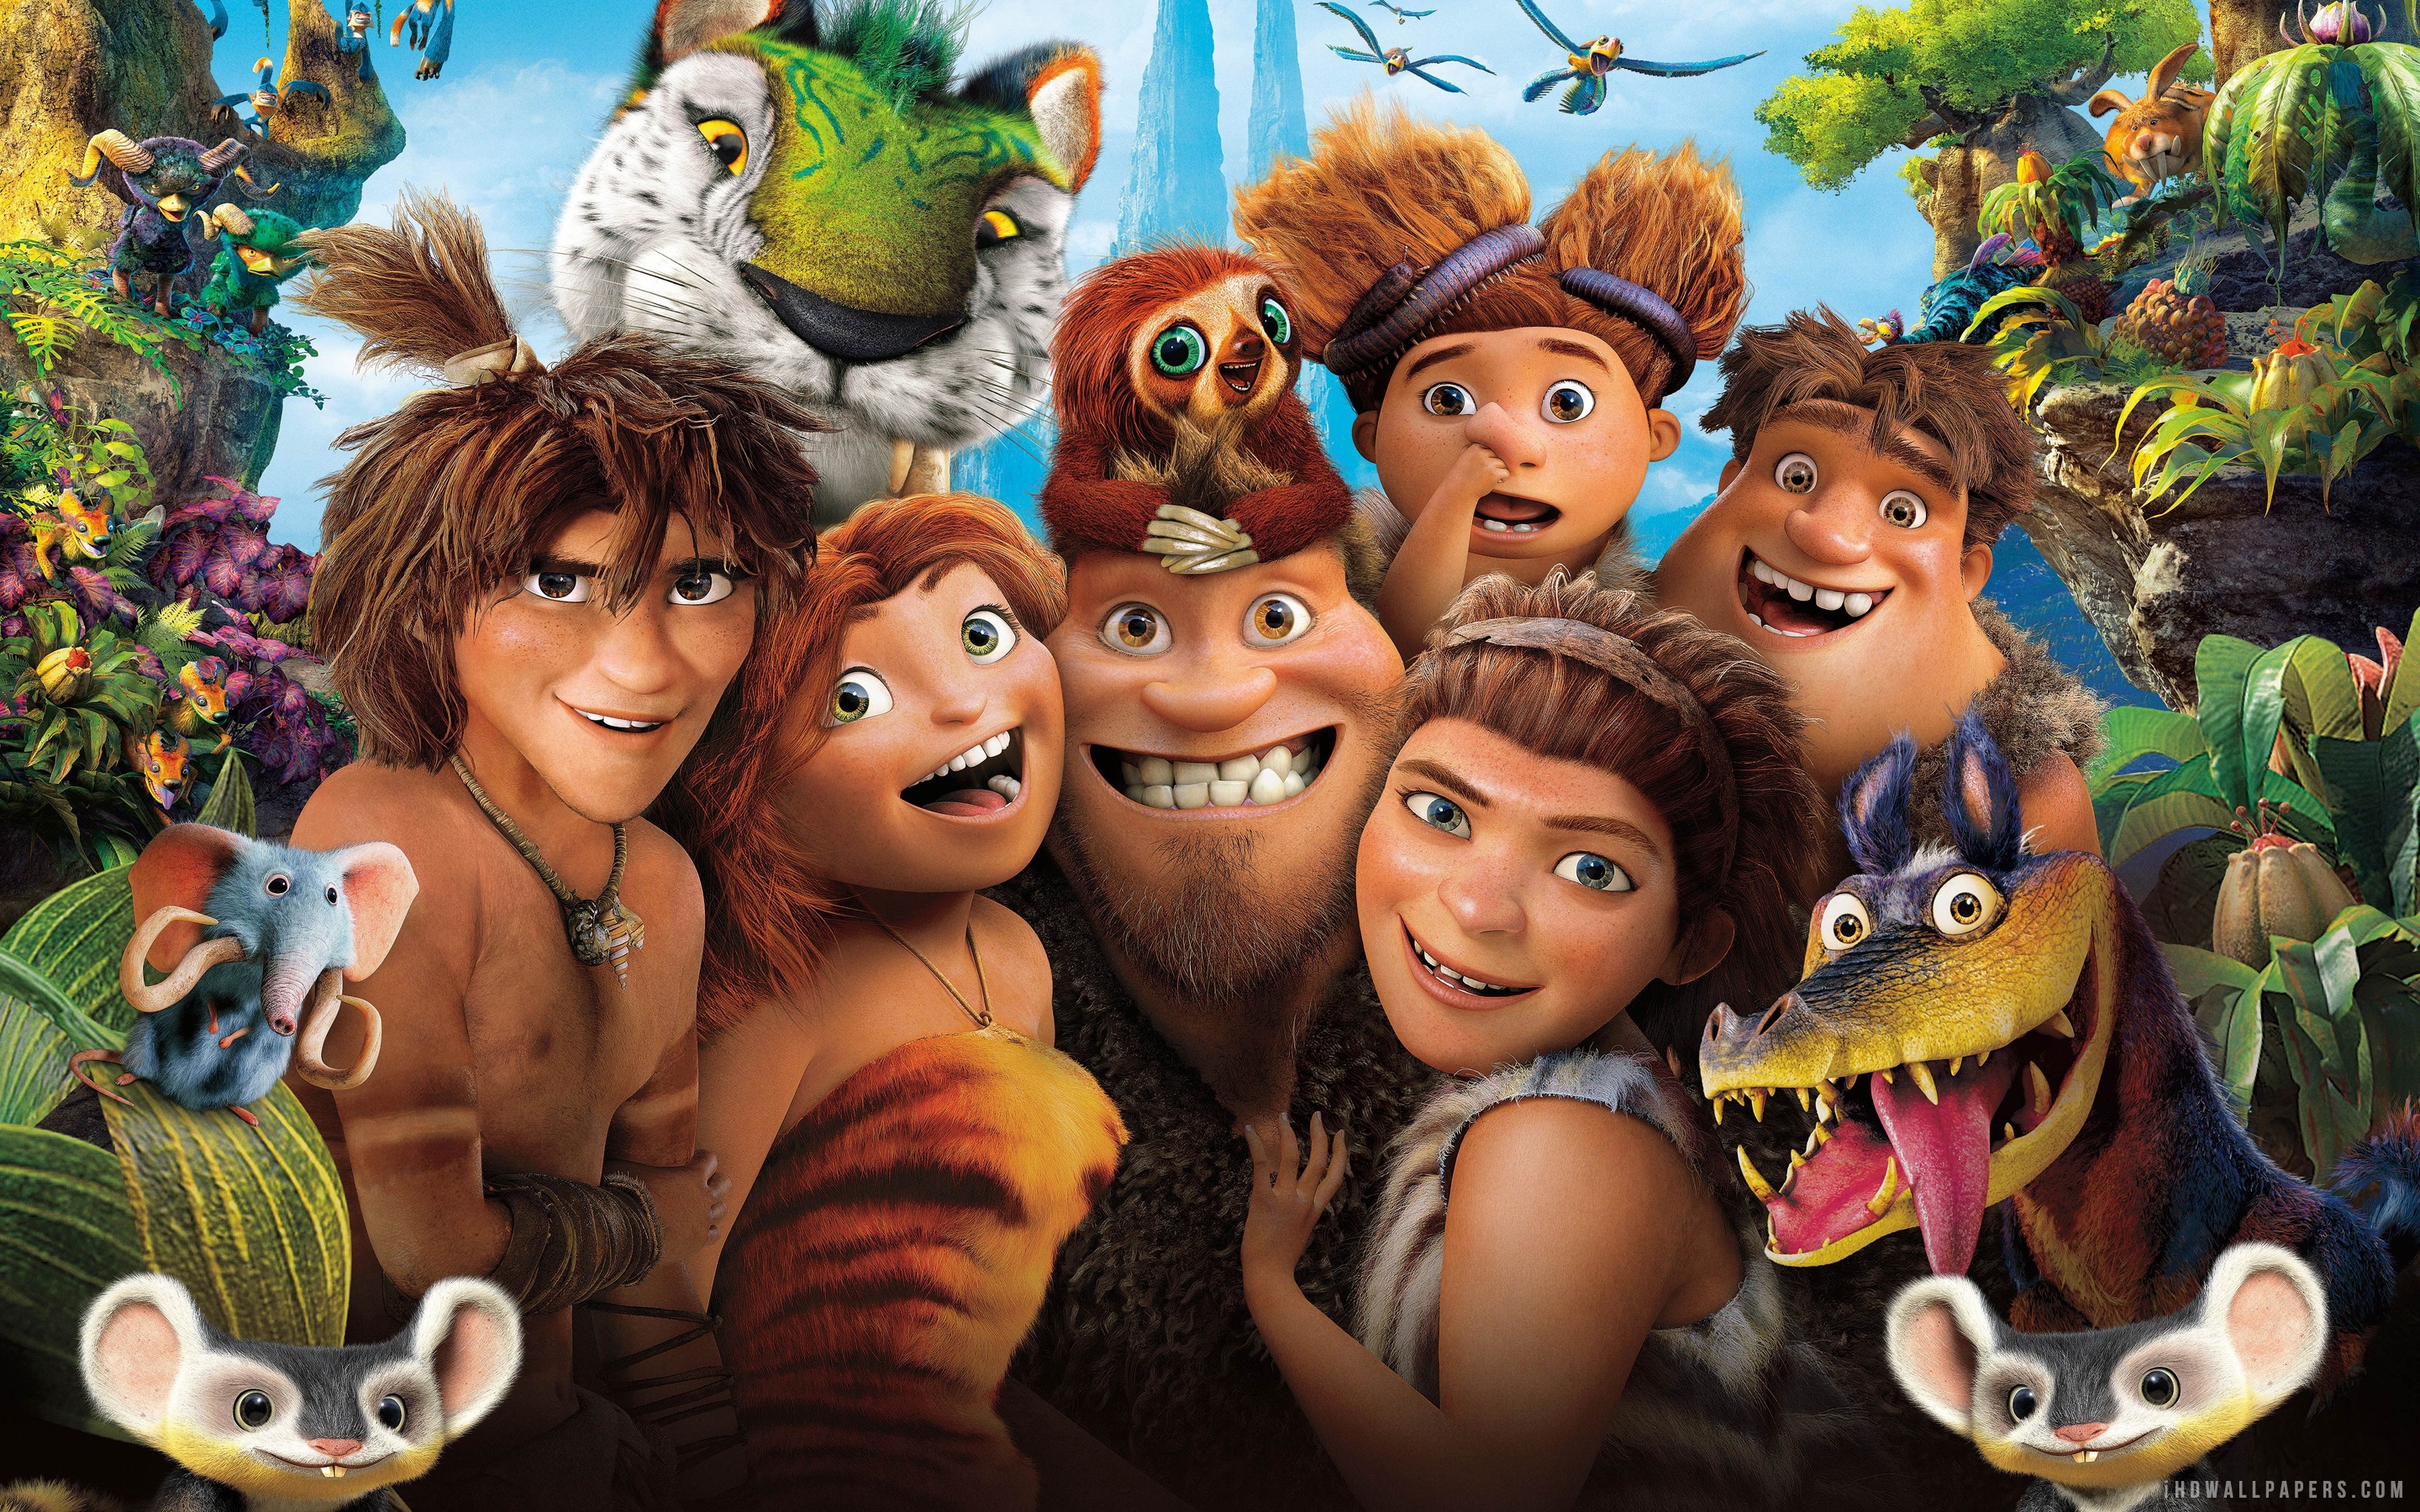 Amazing The Croods Pictures & Backgrounds